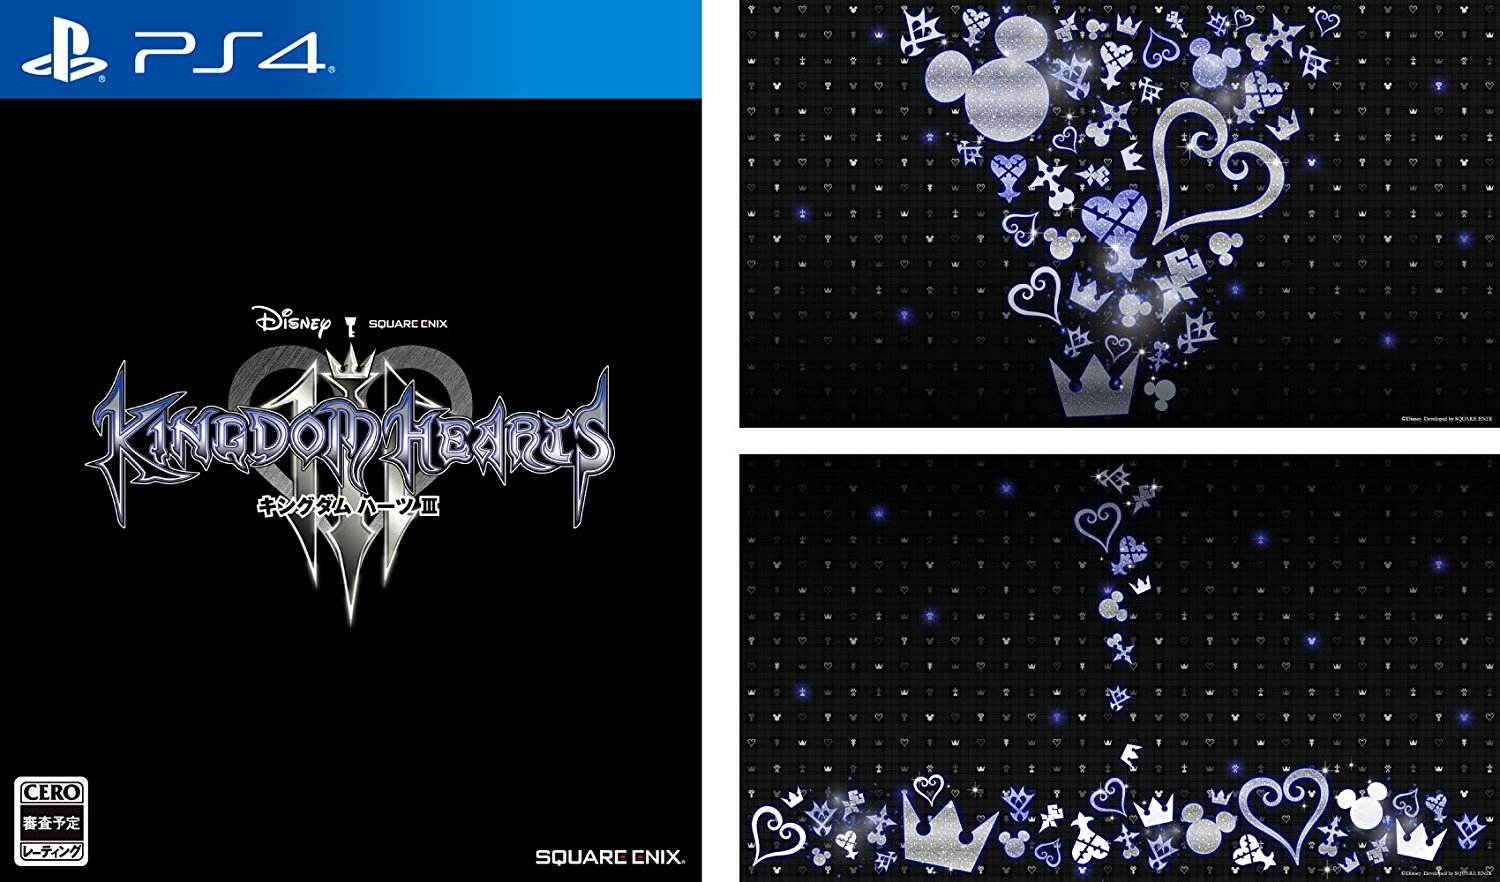 Pre Order The Japanese Edition Of Kingdom Hearts 3 On Amazon Japan And Get Exclusive Ps4 Theme News Kingdom Hearts Insider